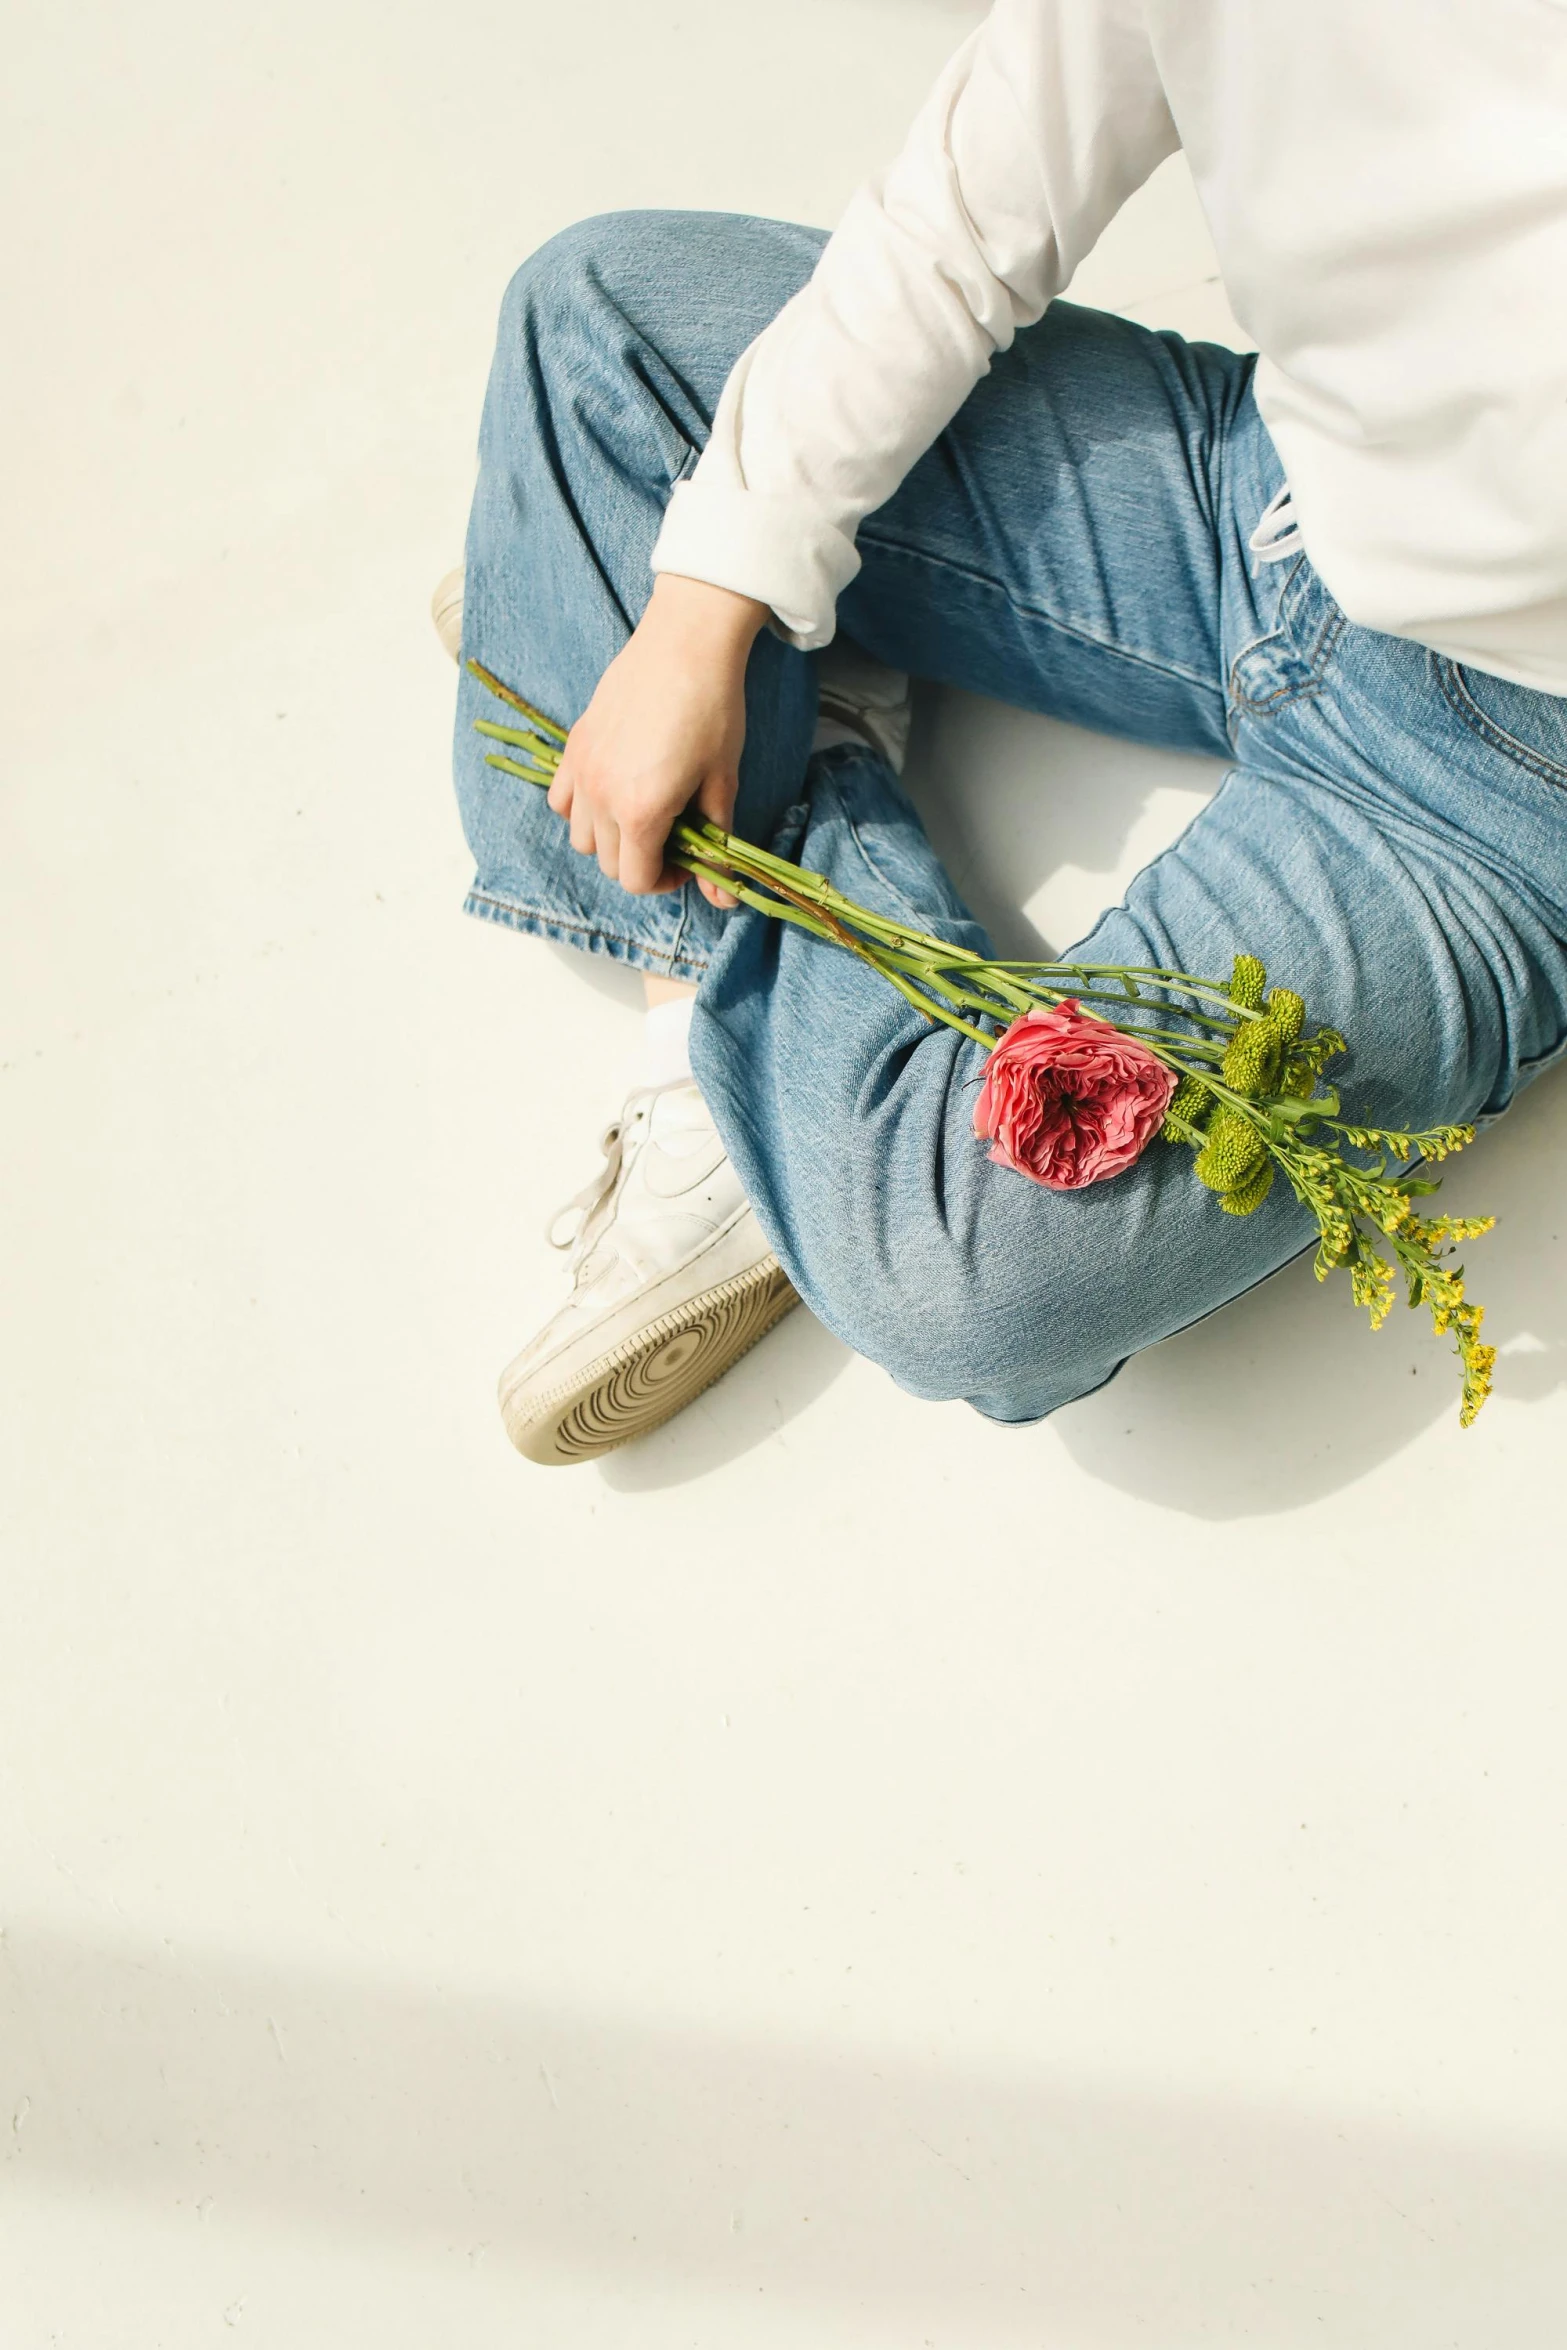 a person sitting on the ground with a flower in their hand, wearing jeans, white shirt and blue jeans